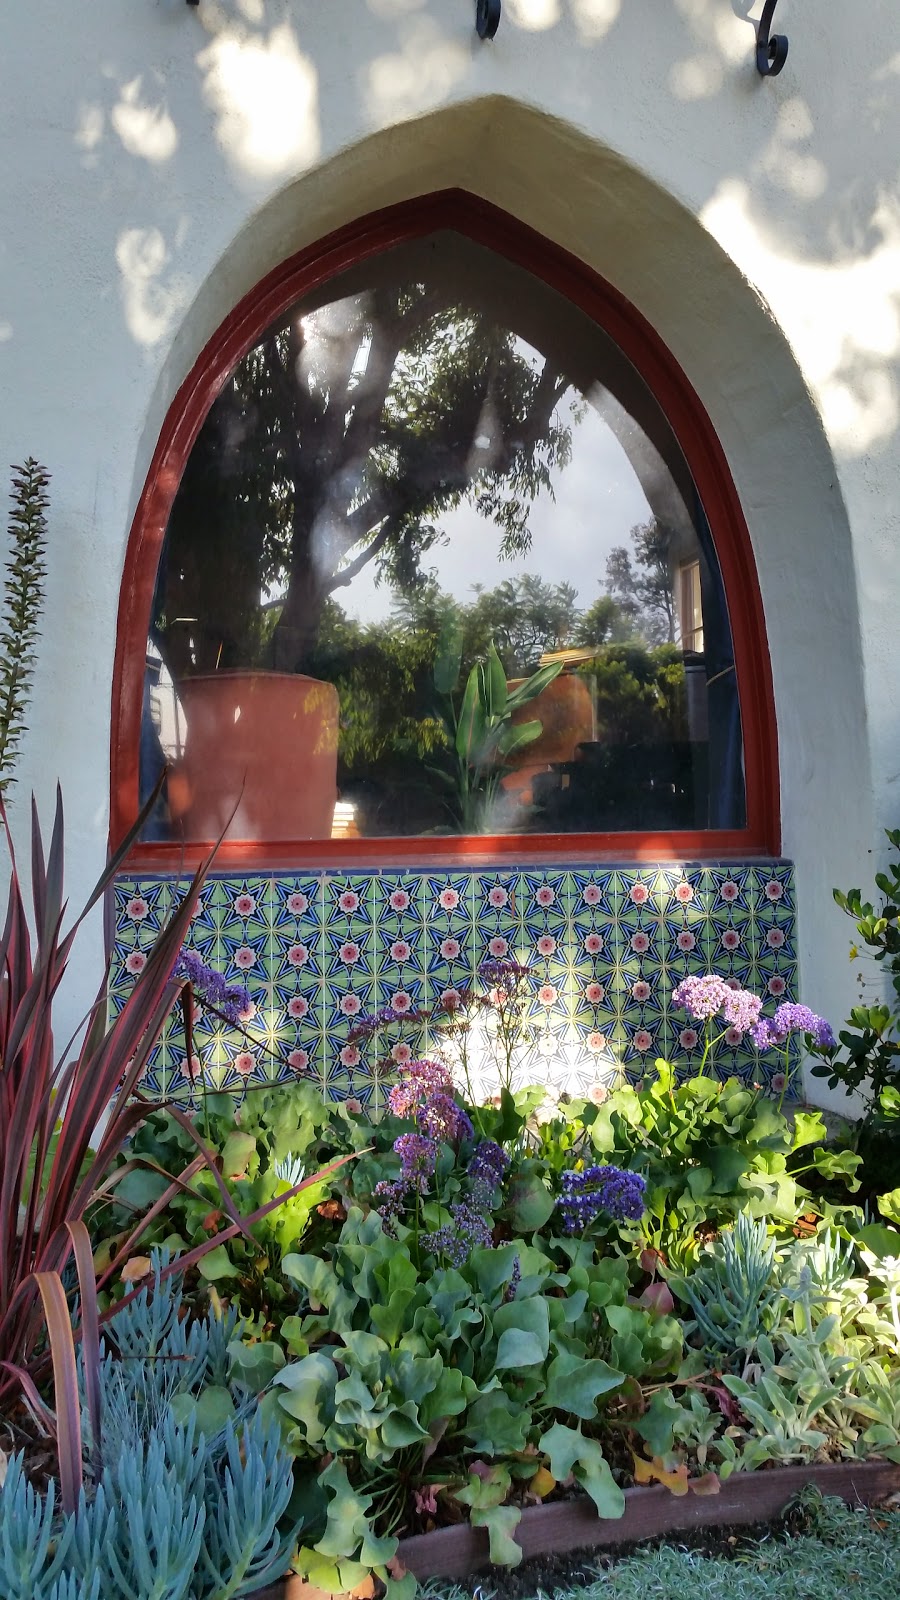 These brightly colored tiles are grouped beneath a Moorish arch to create a colorful tribute to Spanish Revival Architecture